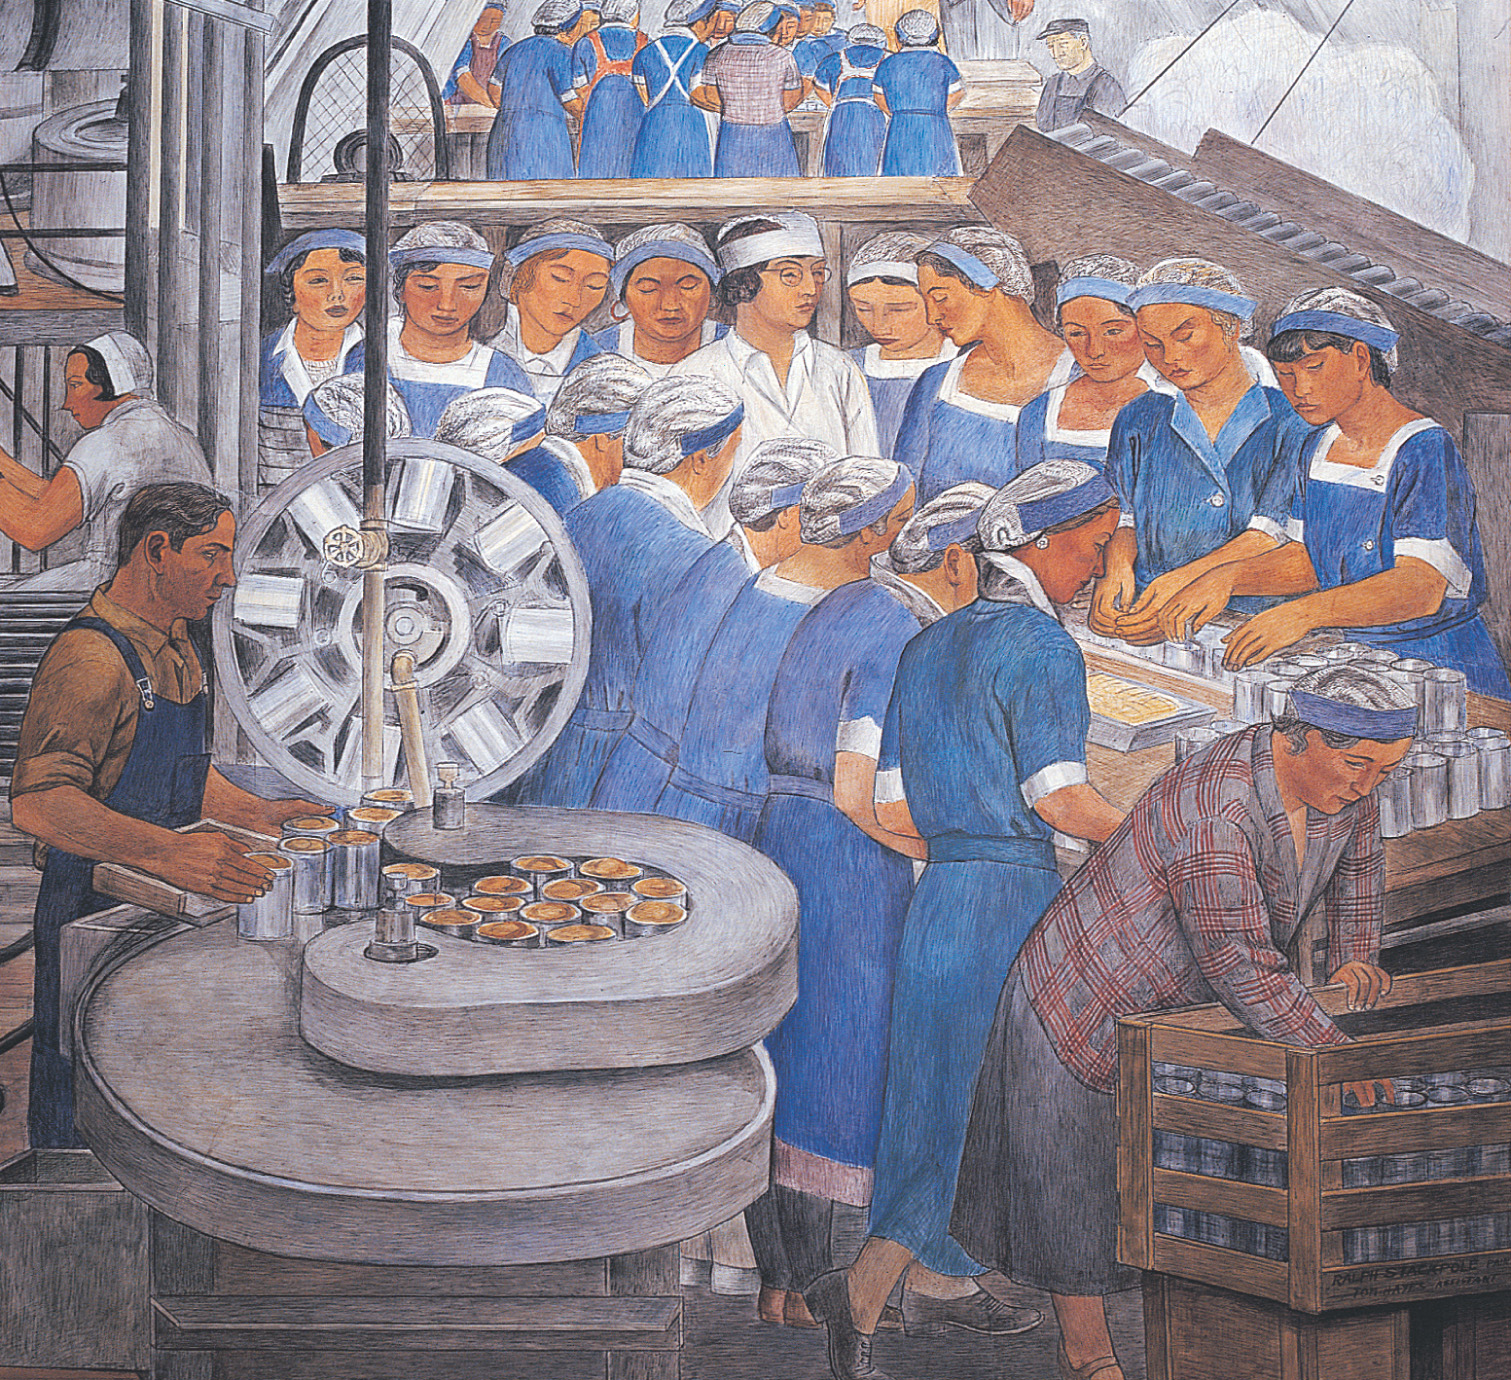 Mural: workers on an assembly line